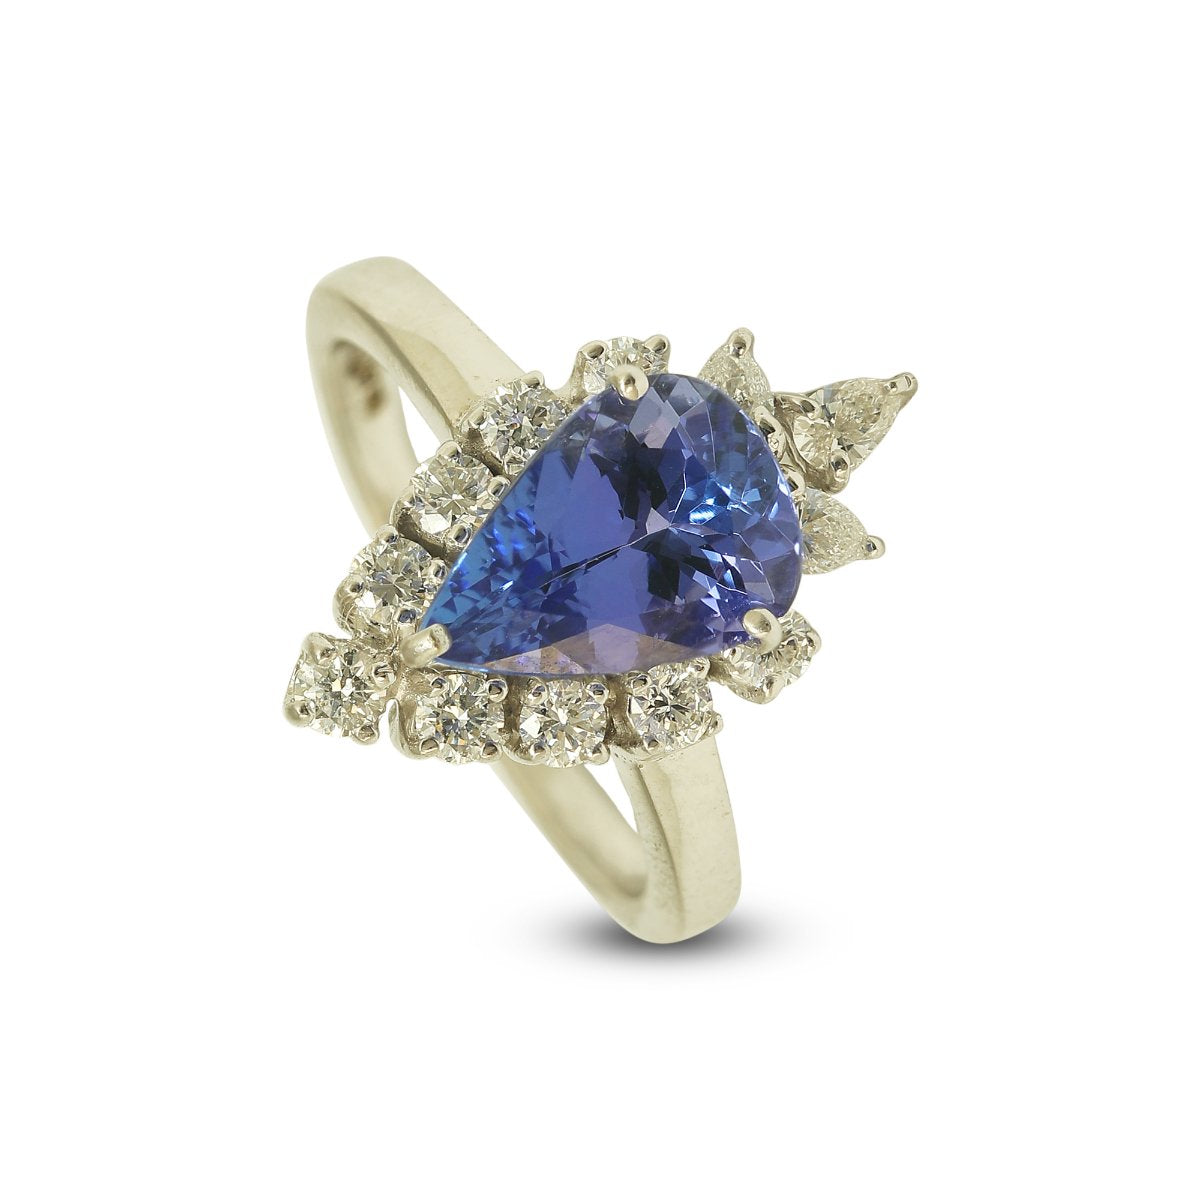 The Azul Ring_JDR1015